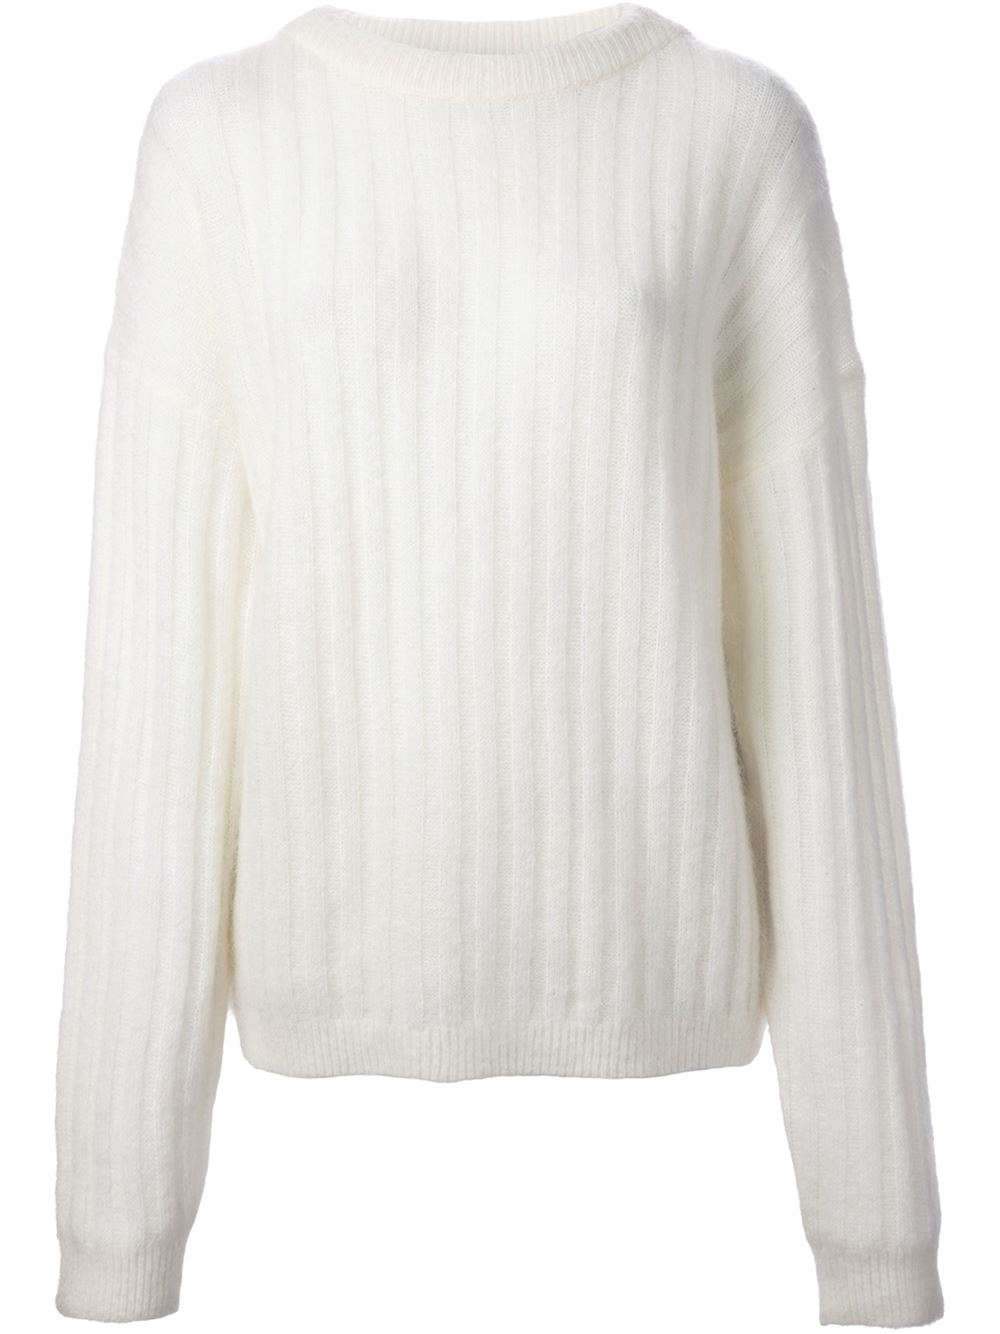 Acne Studios Ribbed Sweater in White - Lyst